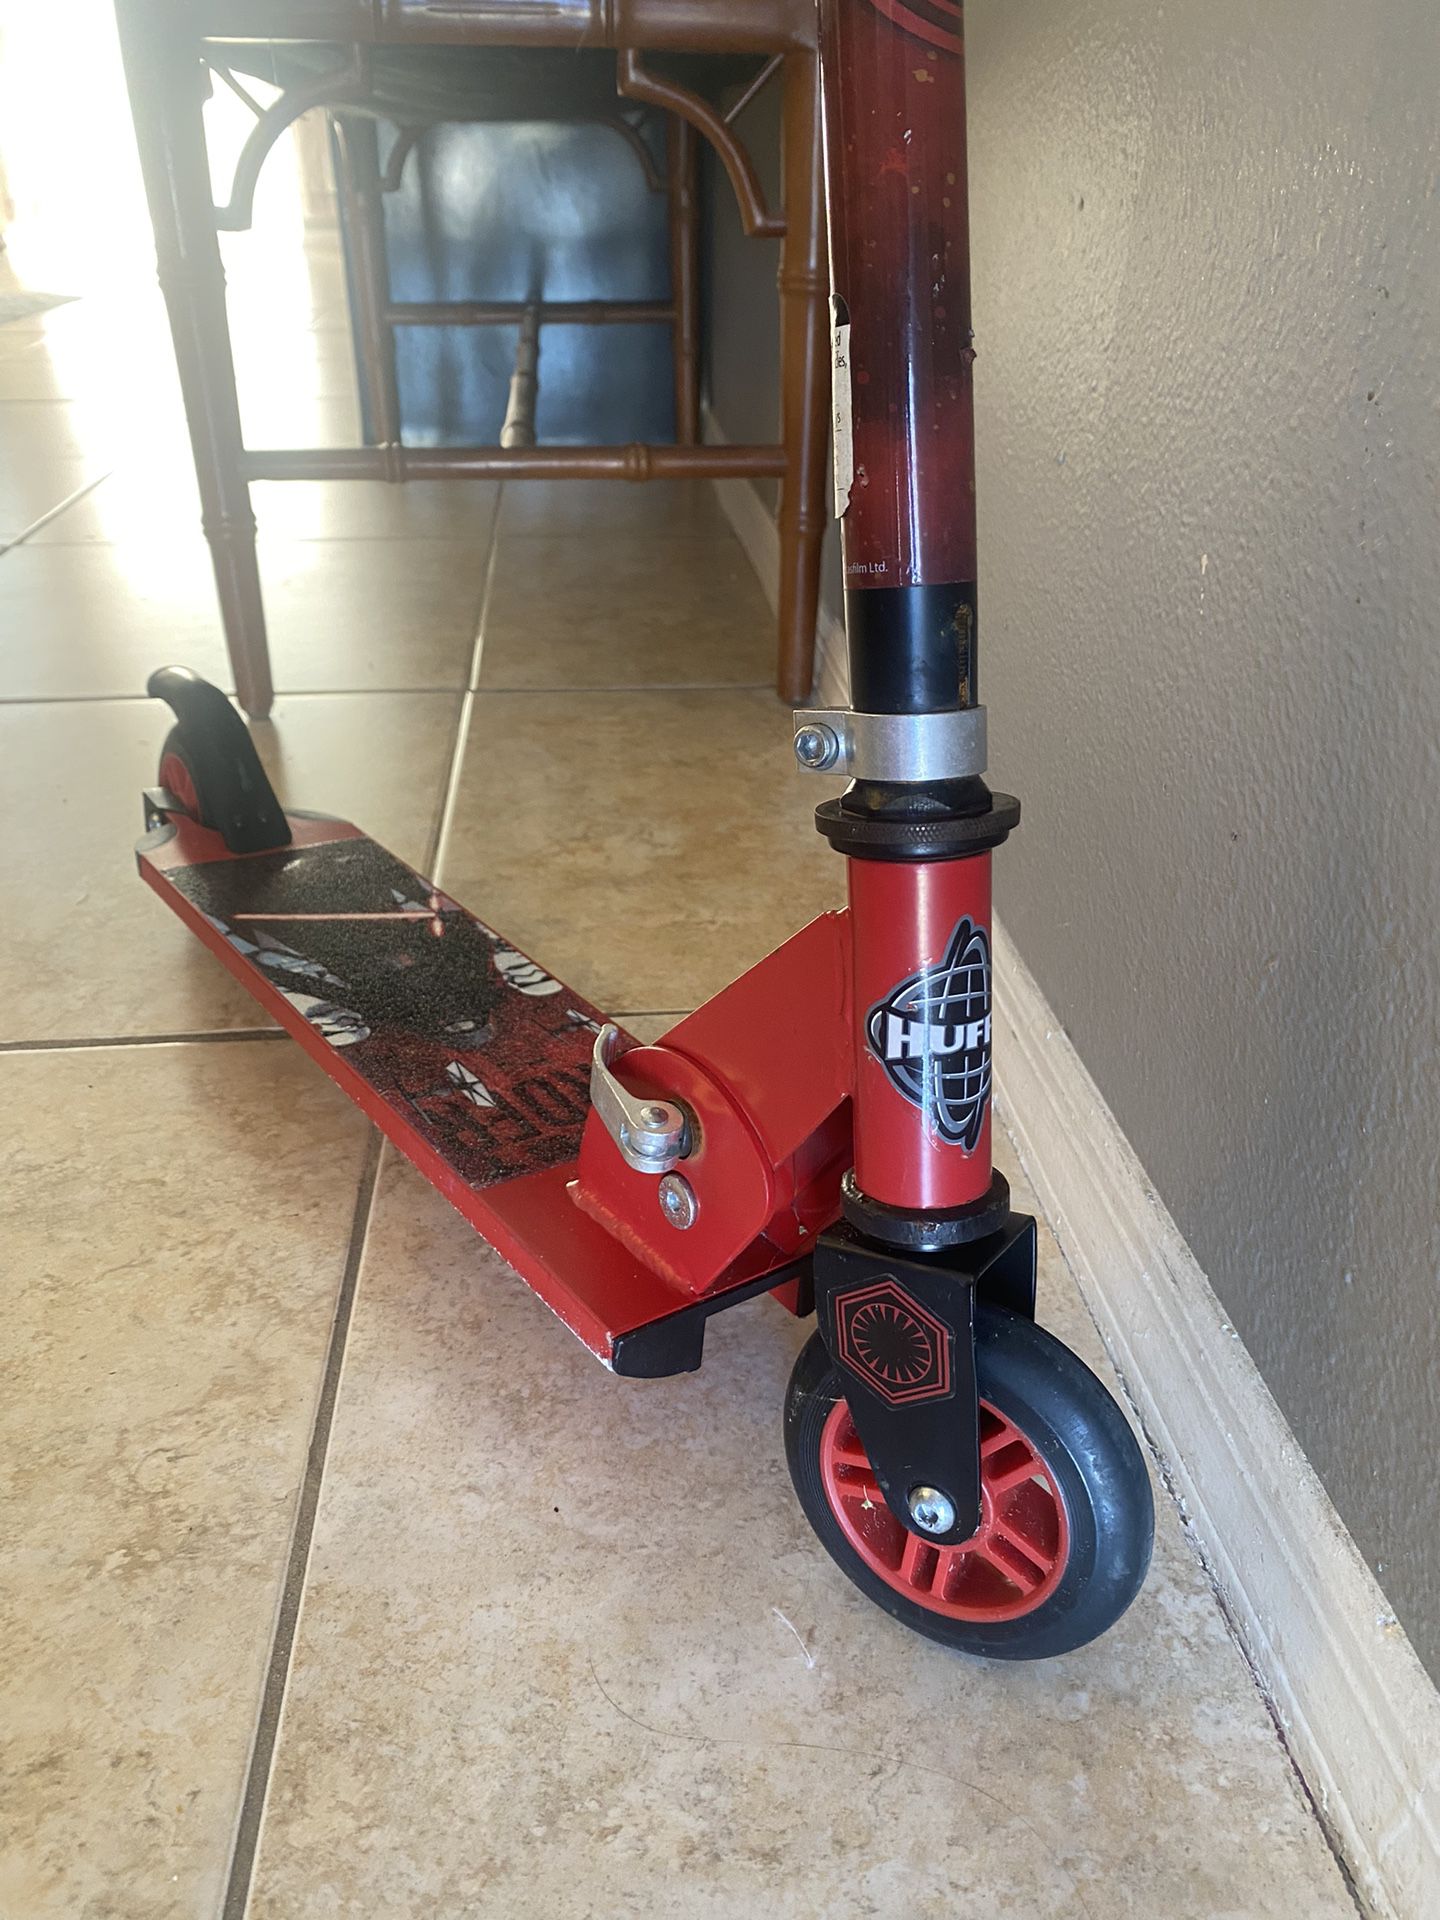 Scooter For Kids 